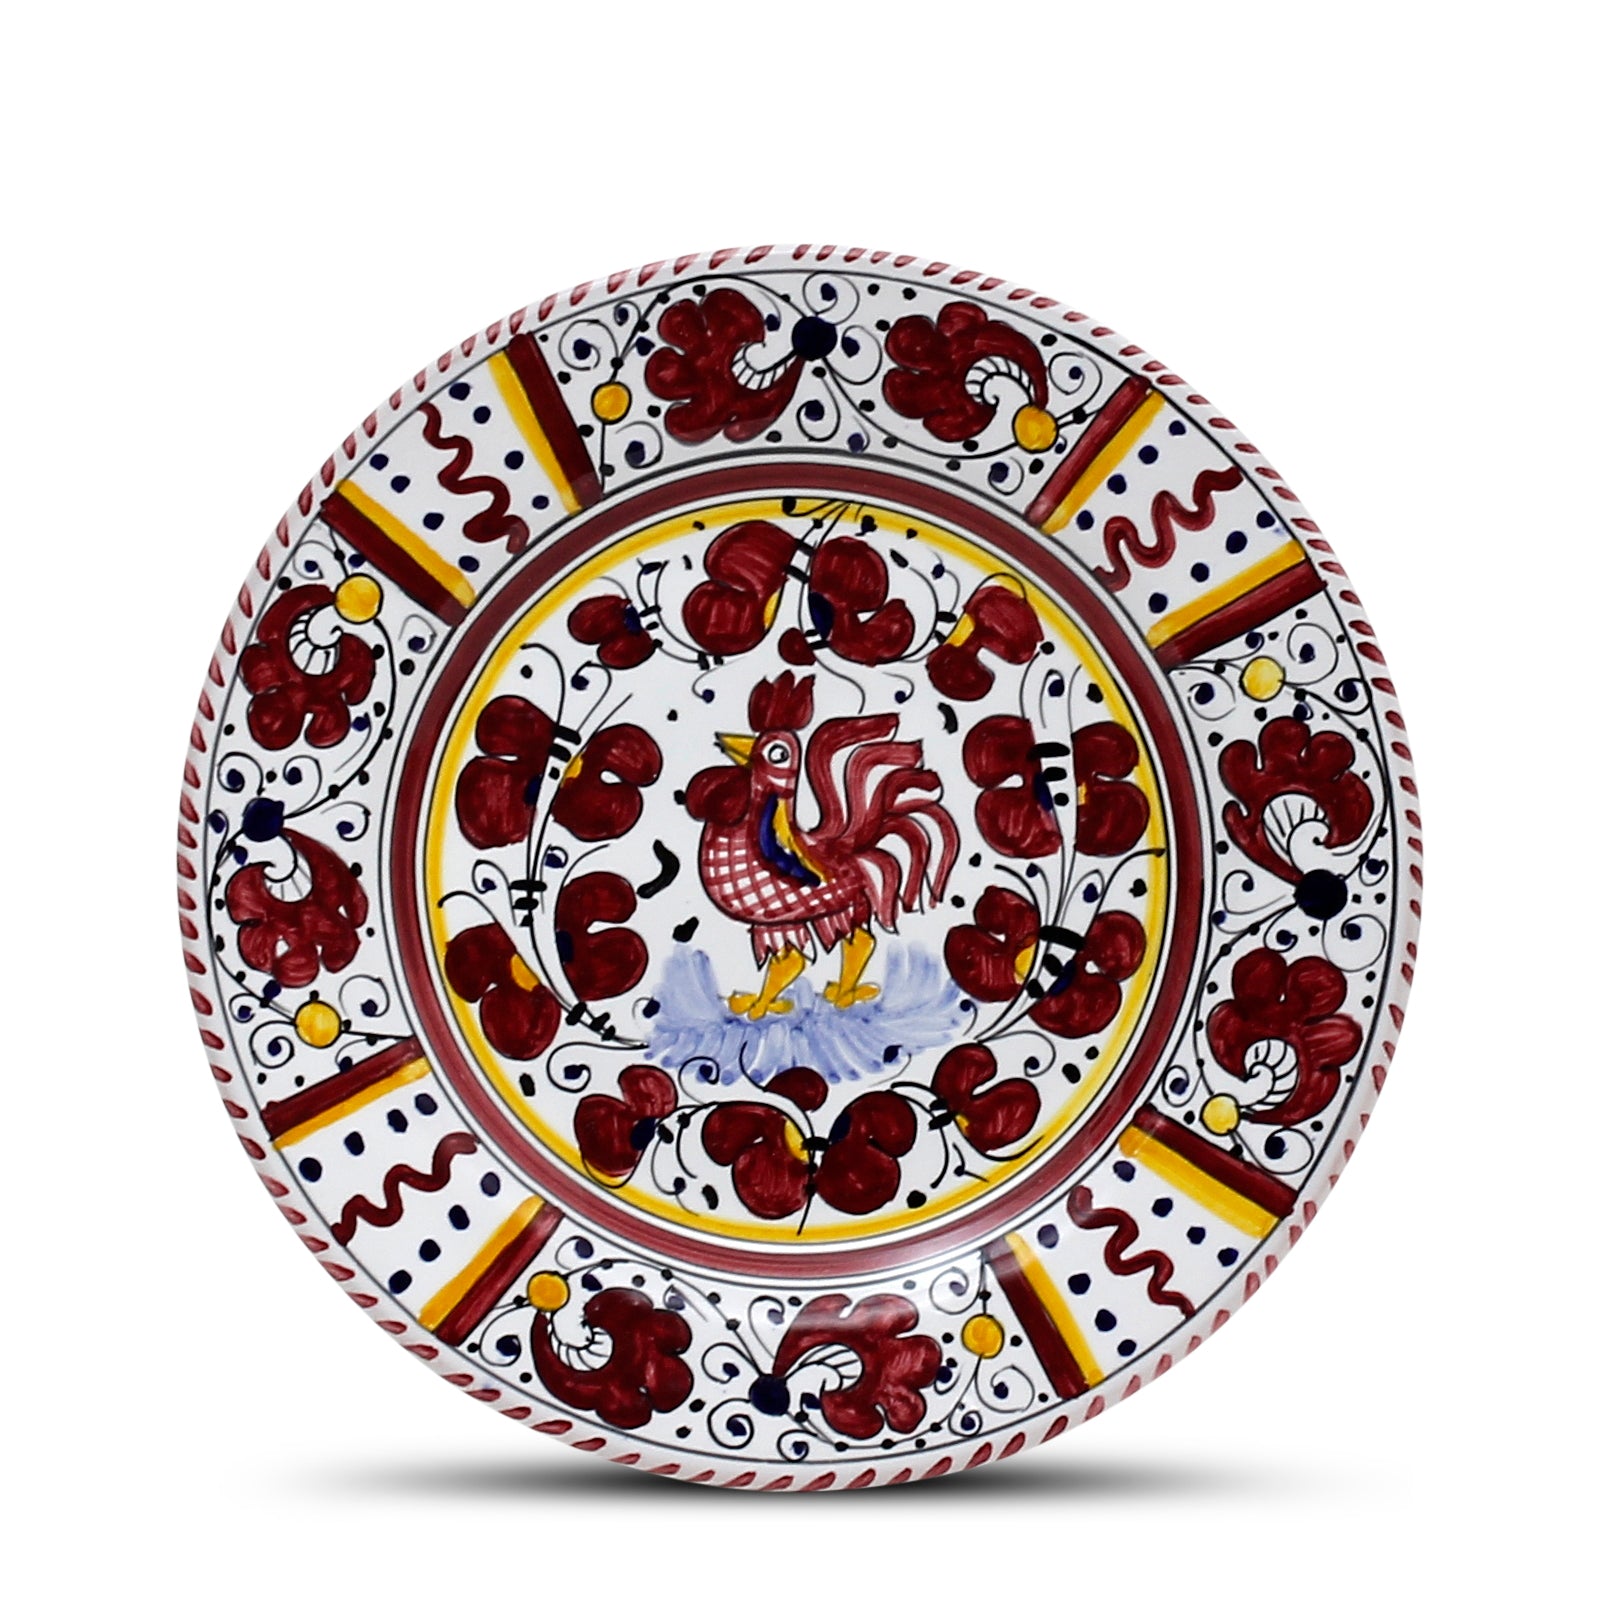 ORVIETO RED ROOSTER: 3 Pieces Dinnerware Place Setting - Artistica.com